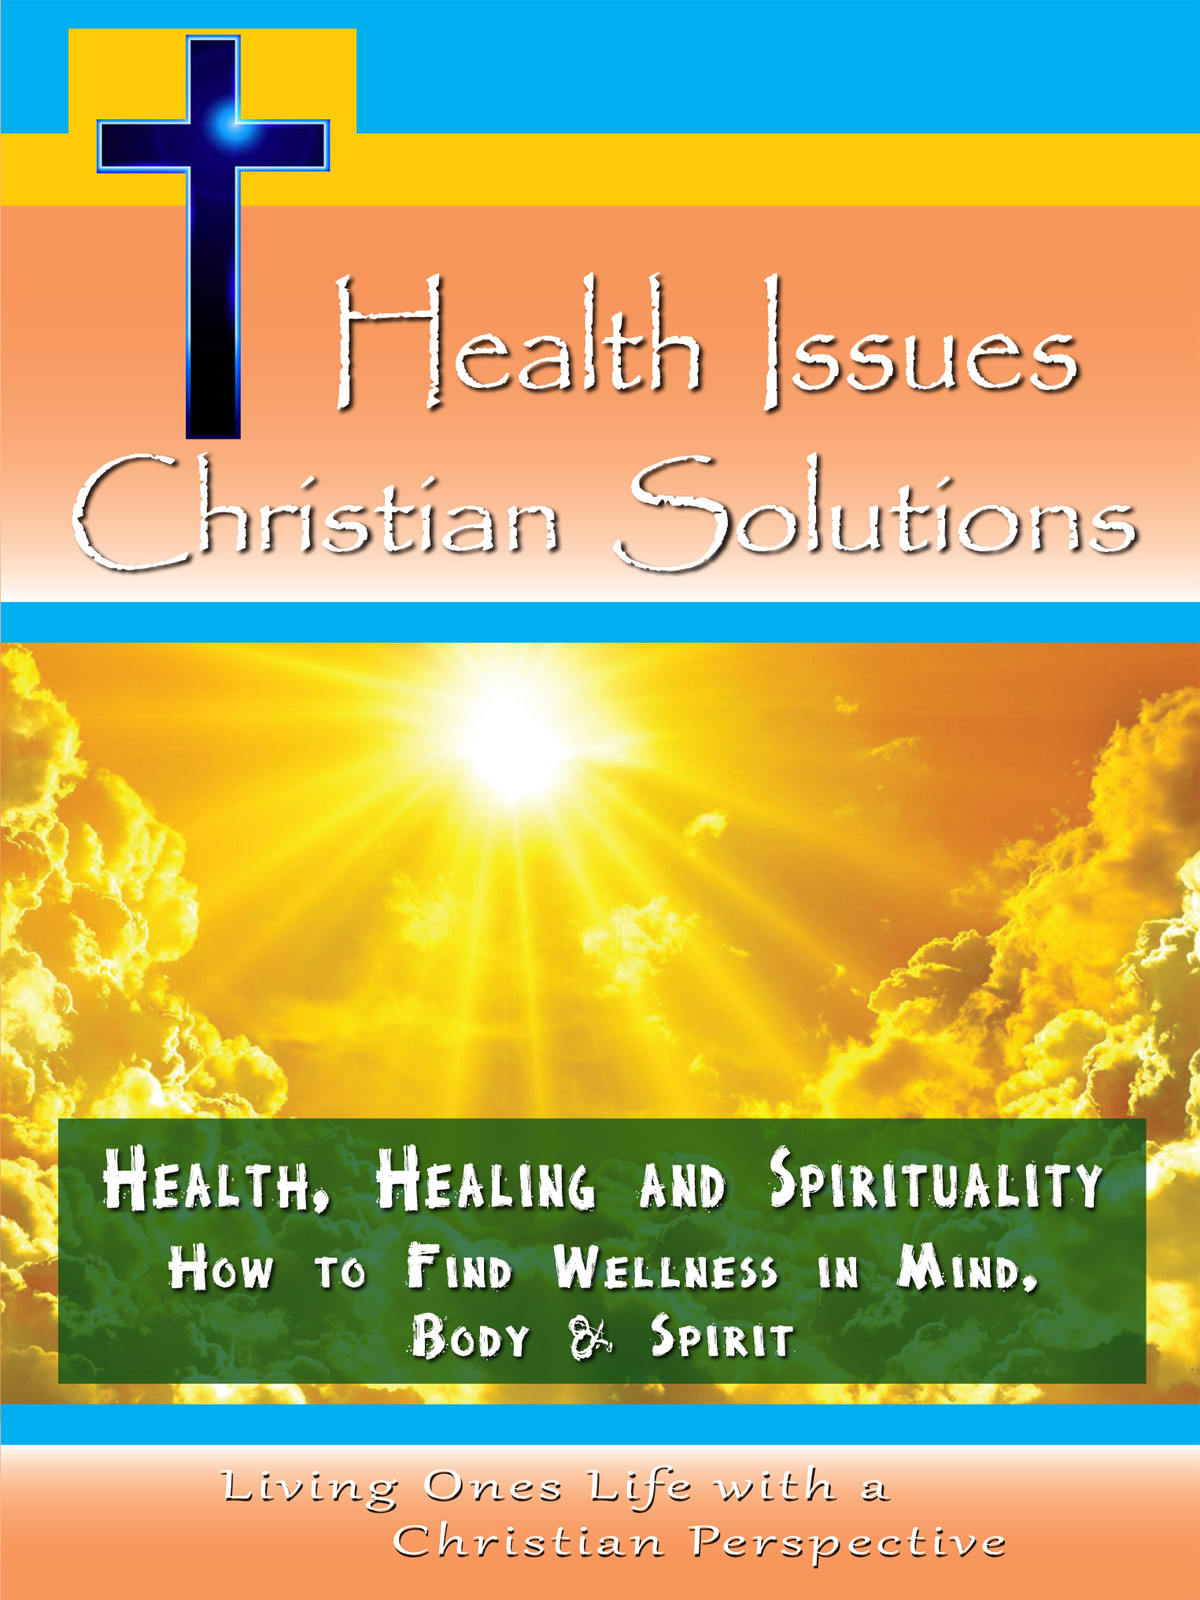 CH10031 - Health, Healing and Spirituality How to Find Wellness in Mind, Body & Spirit